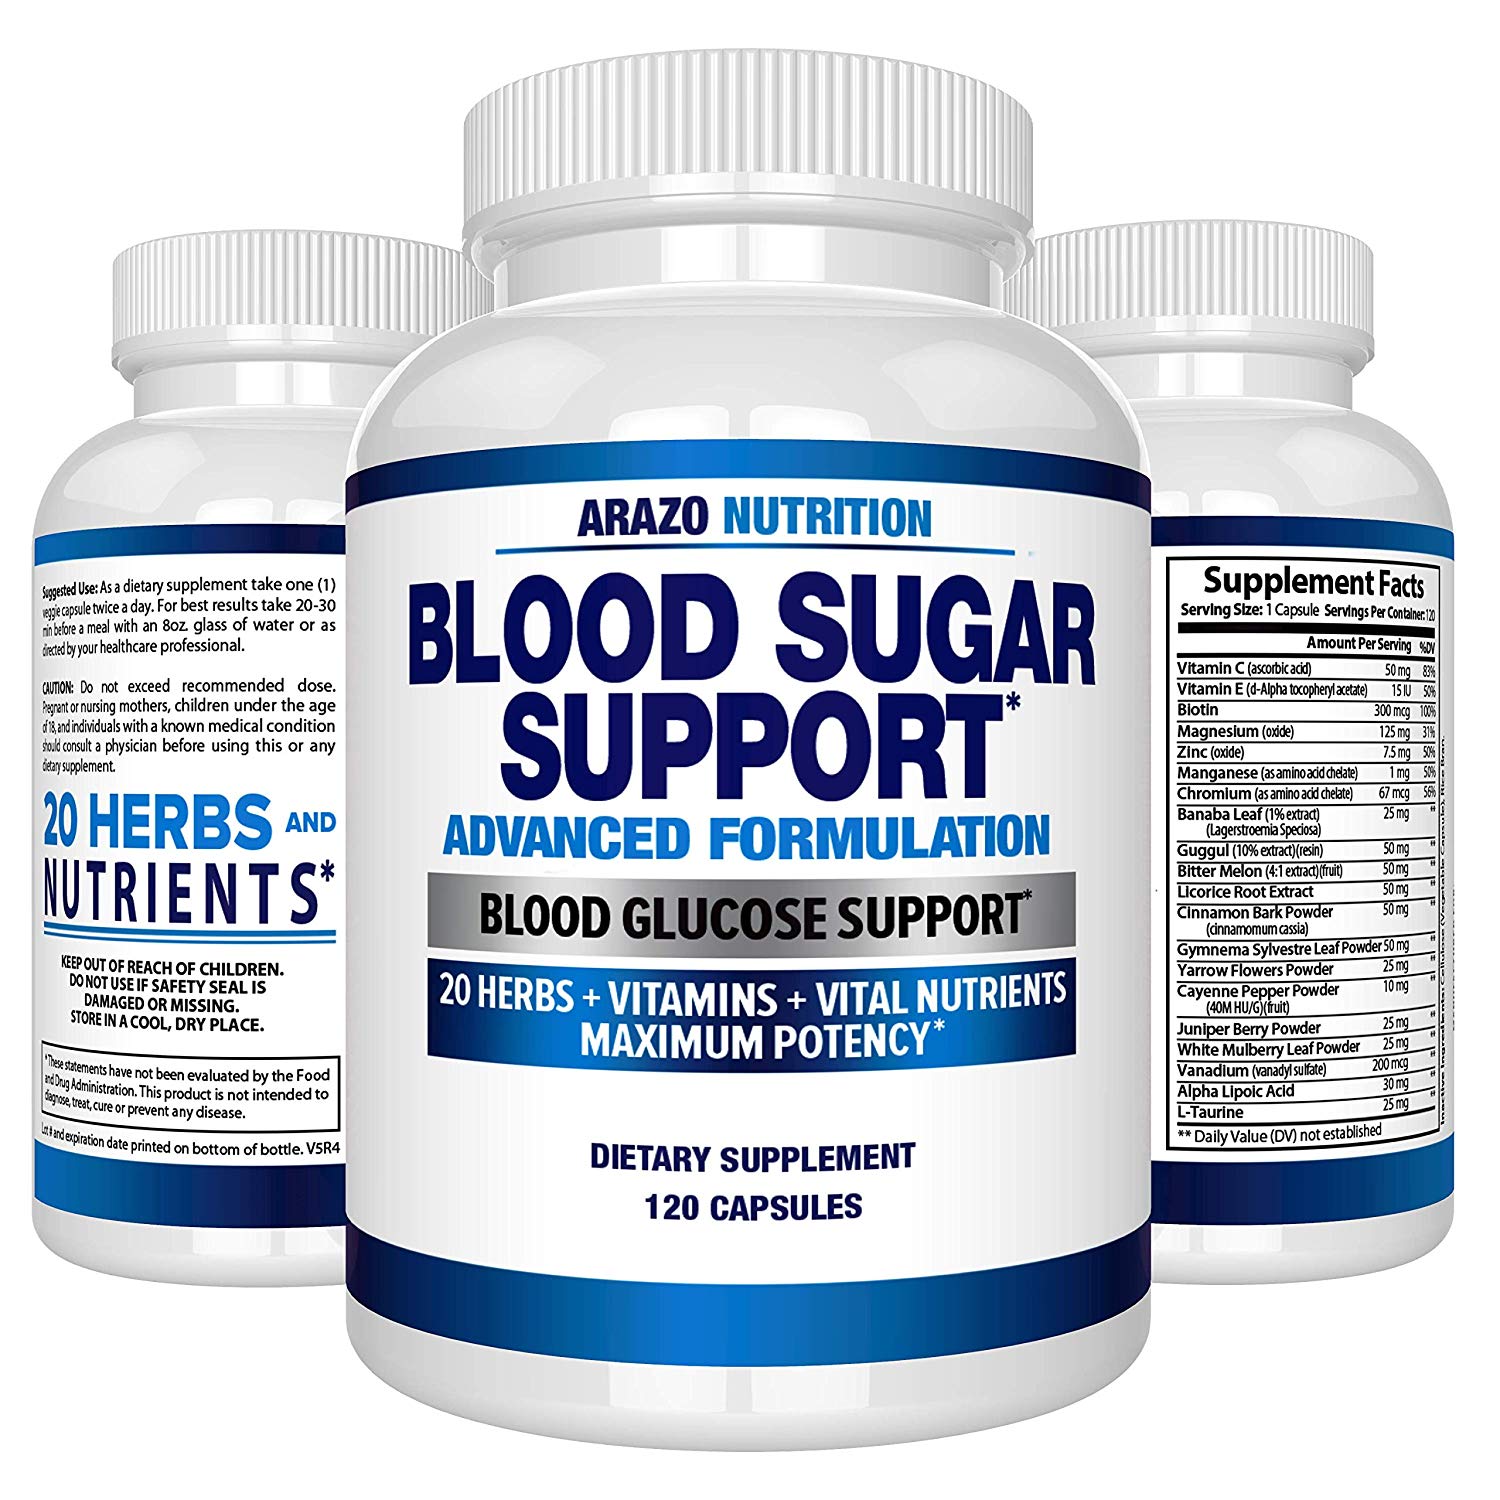 Review of Blood Sugar Support Supplement - 20 HERBS & Multivitamin for Blood Sugar Control by Arazo Nutrition